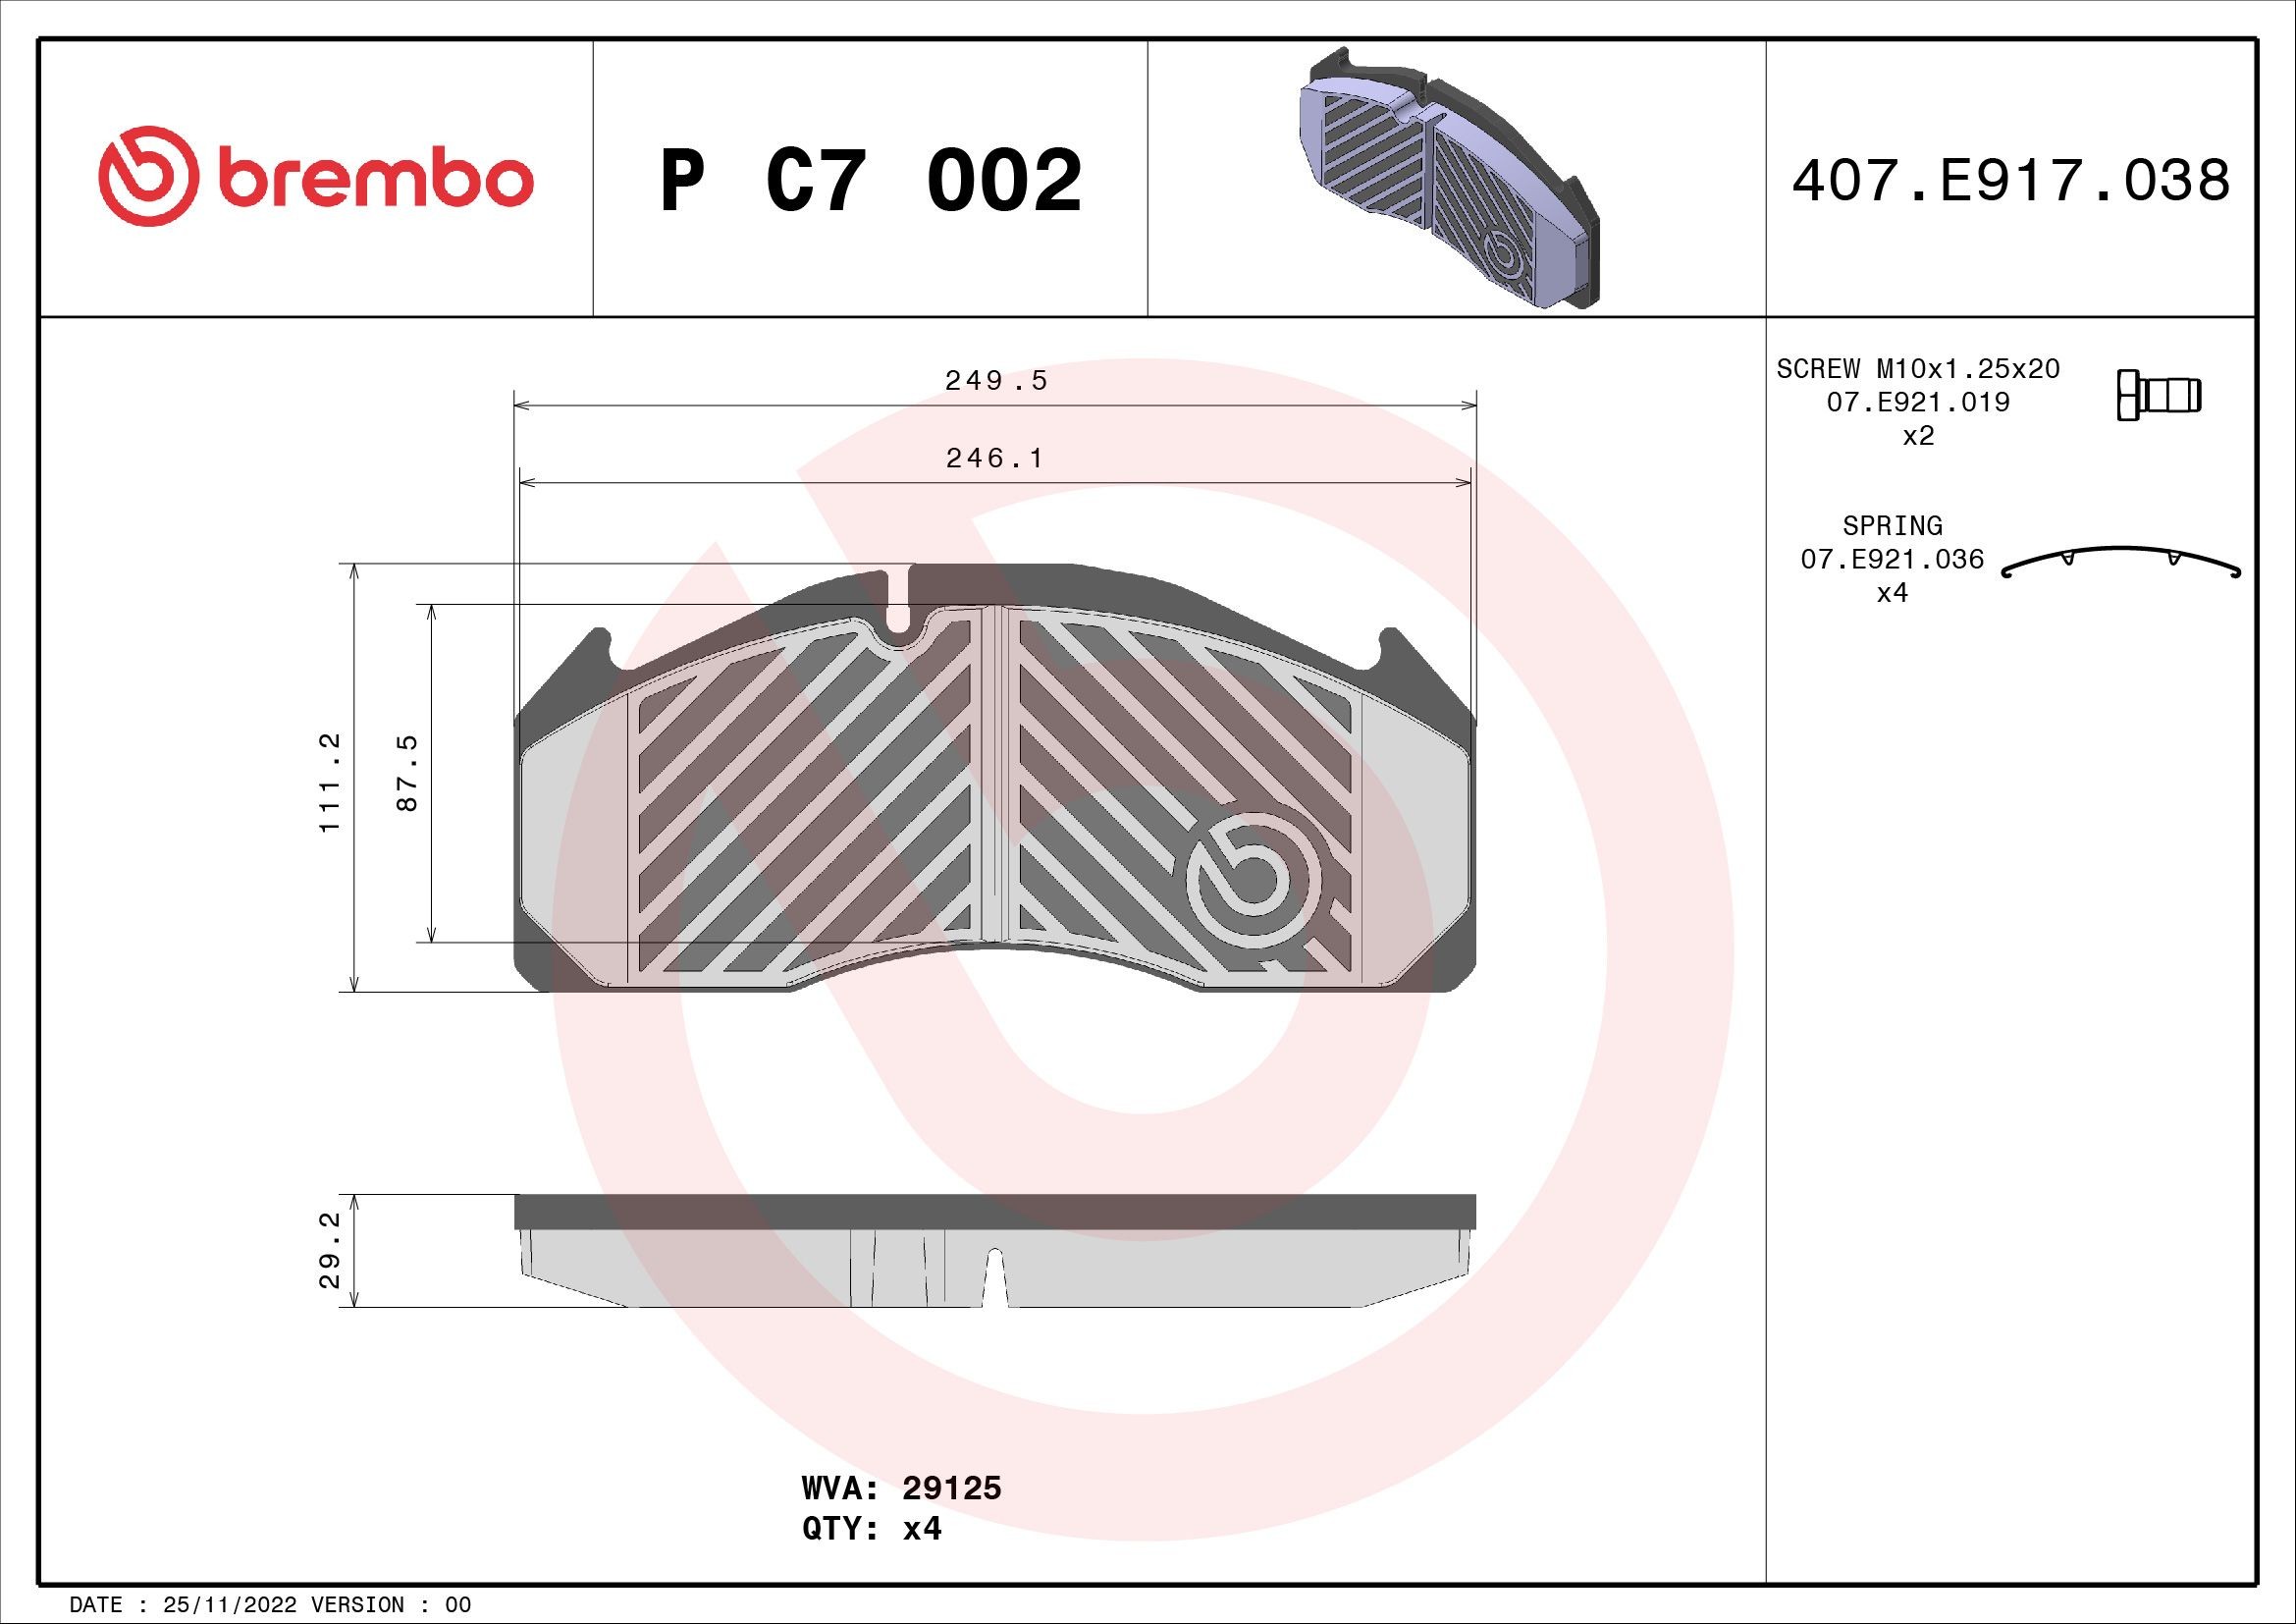 BREMBO P C7 002 Brake pad set prepared for wear indicator, with accessories